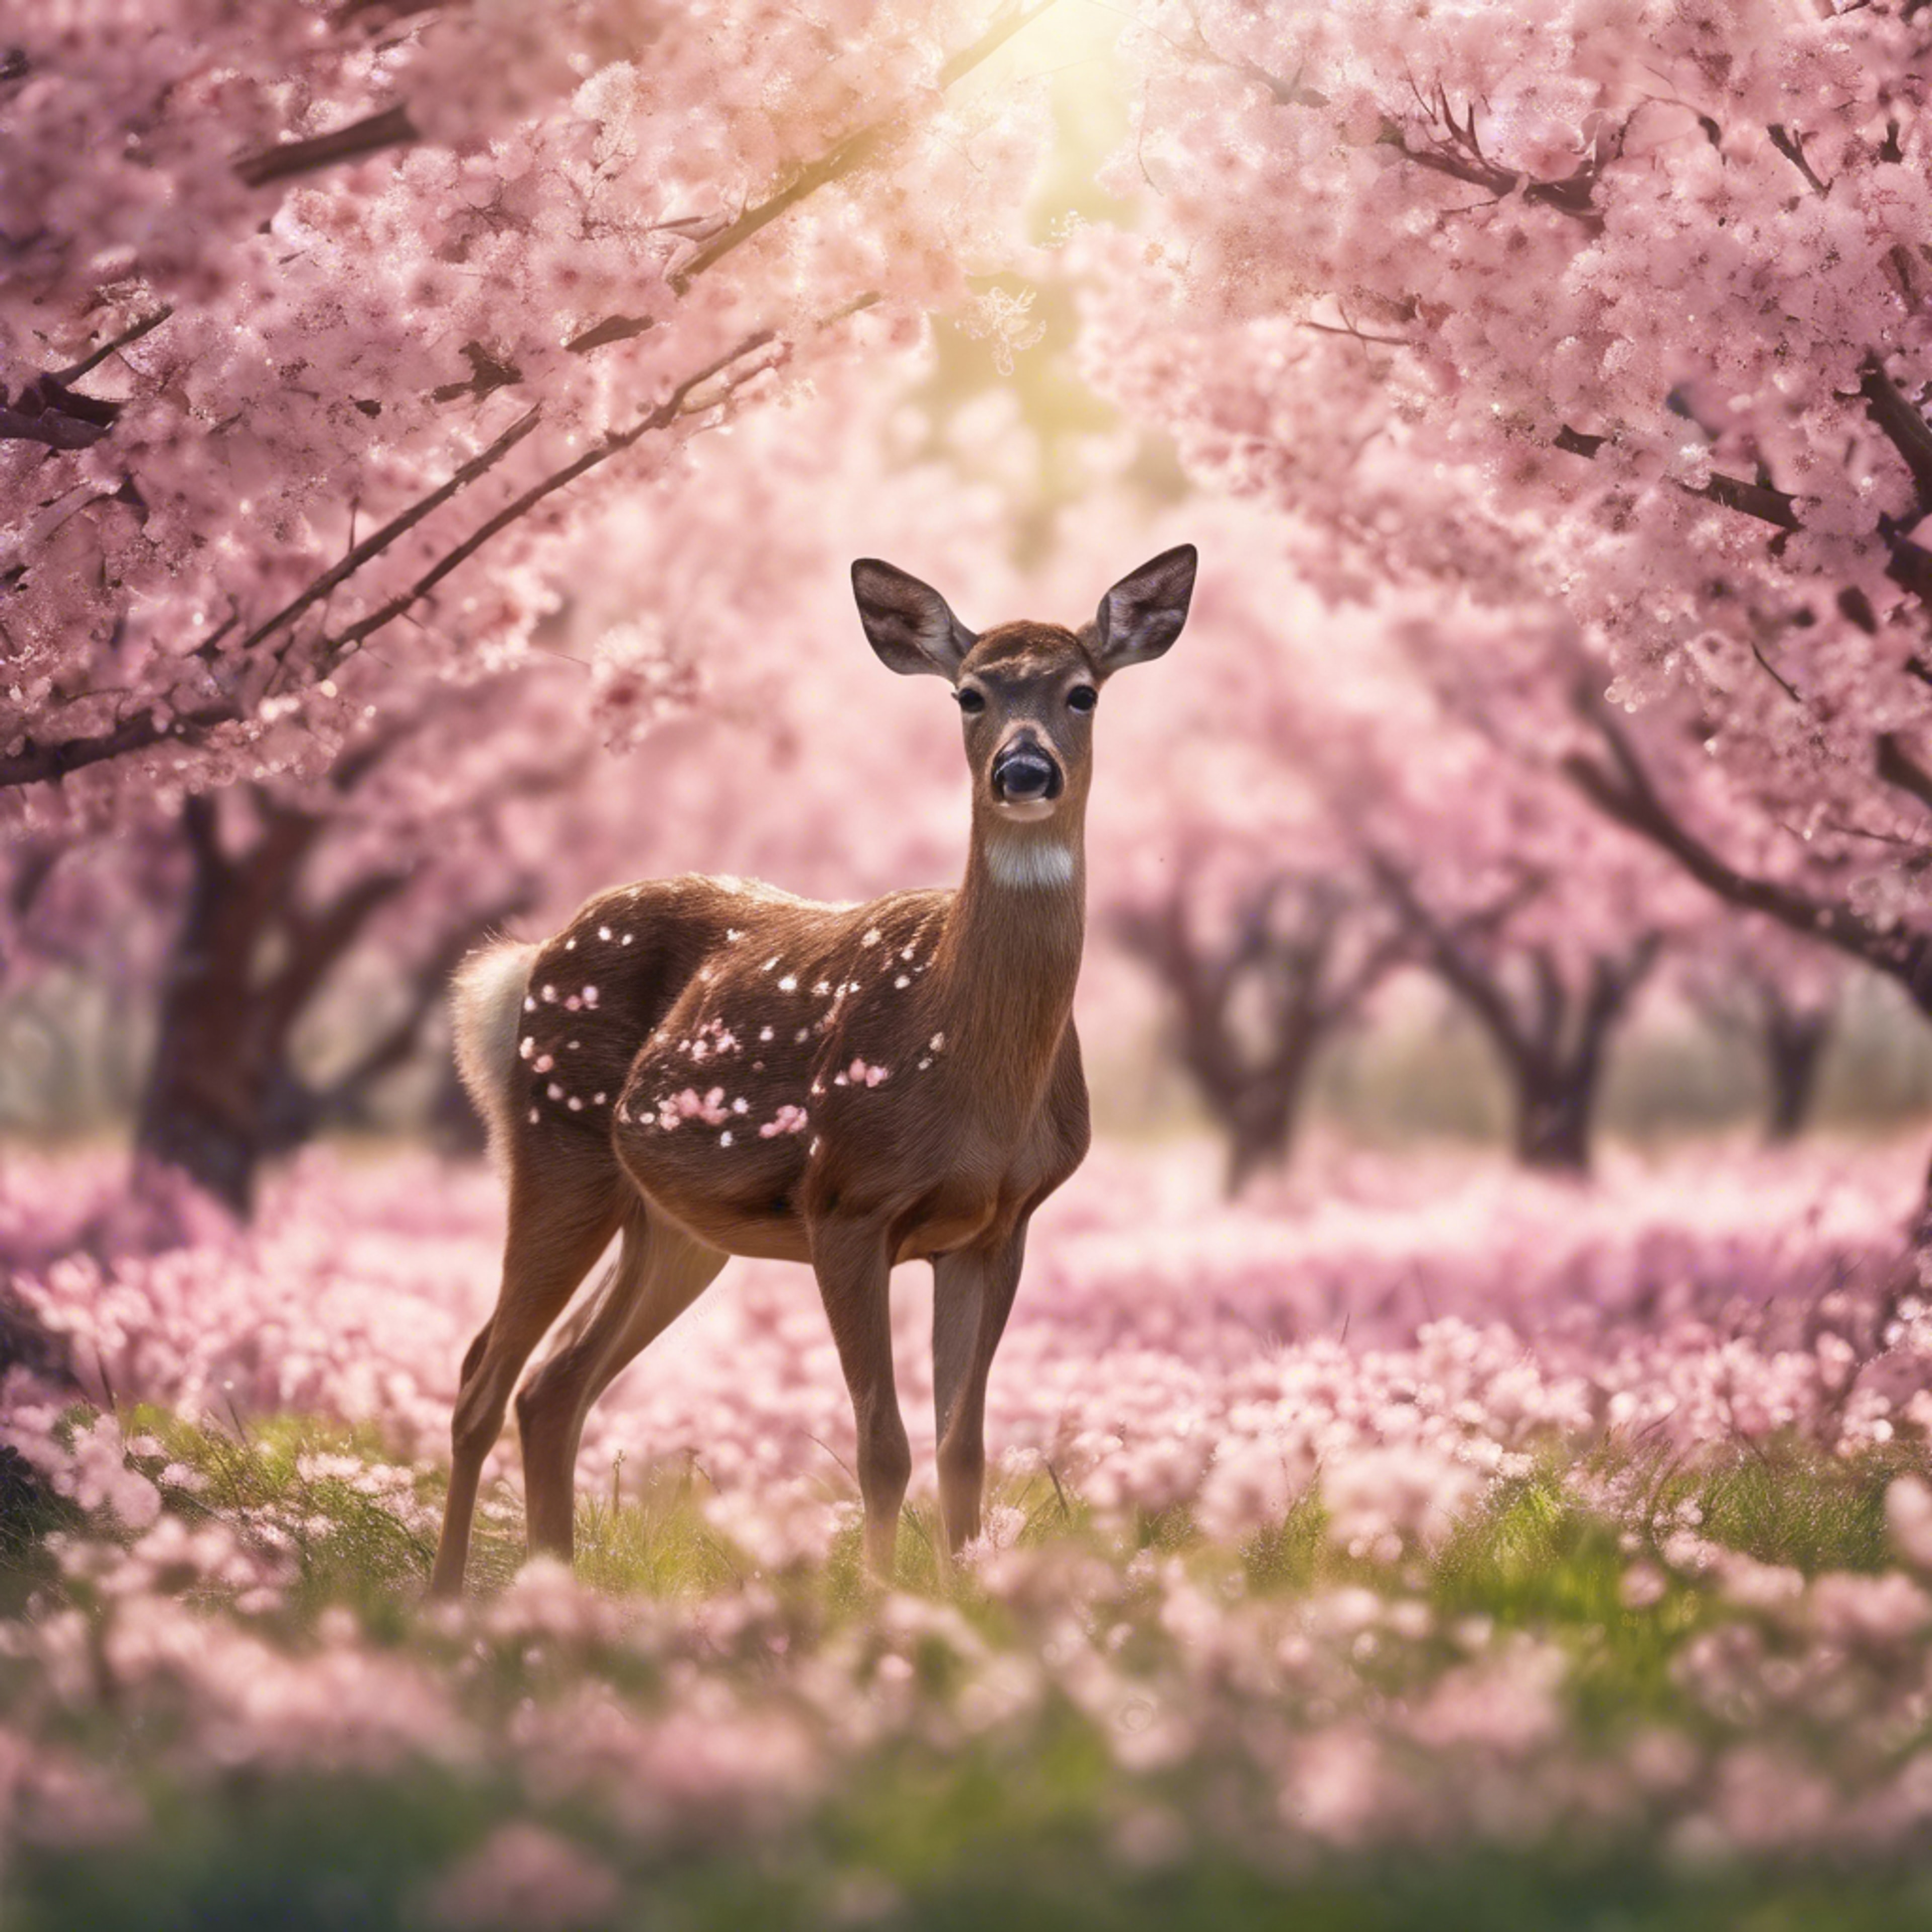 An illustration of a young deer grazing in a field of blooming cherry trees. วอลล์เปเปอร์[a2b025554c3c4b6aabc3]